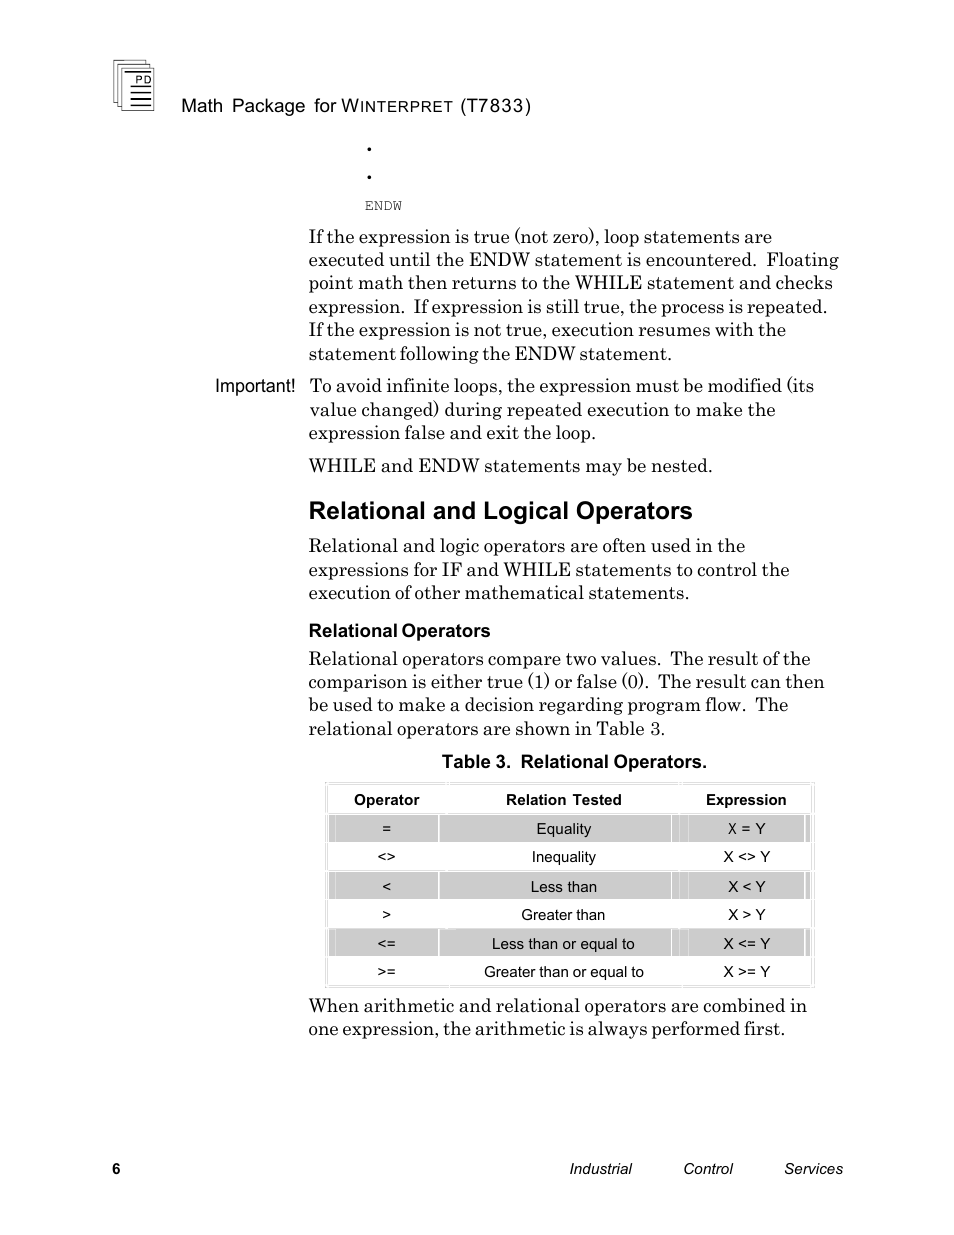 Relational and logical operators | Rockwell Automation T7833 ICS Regent+Plus Math Package for Winternet User Manual | Page 6 / 26